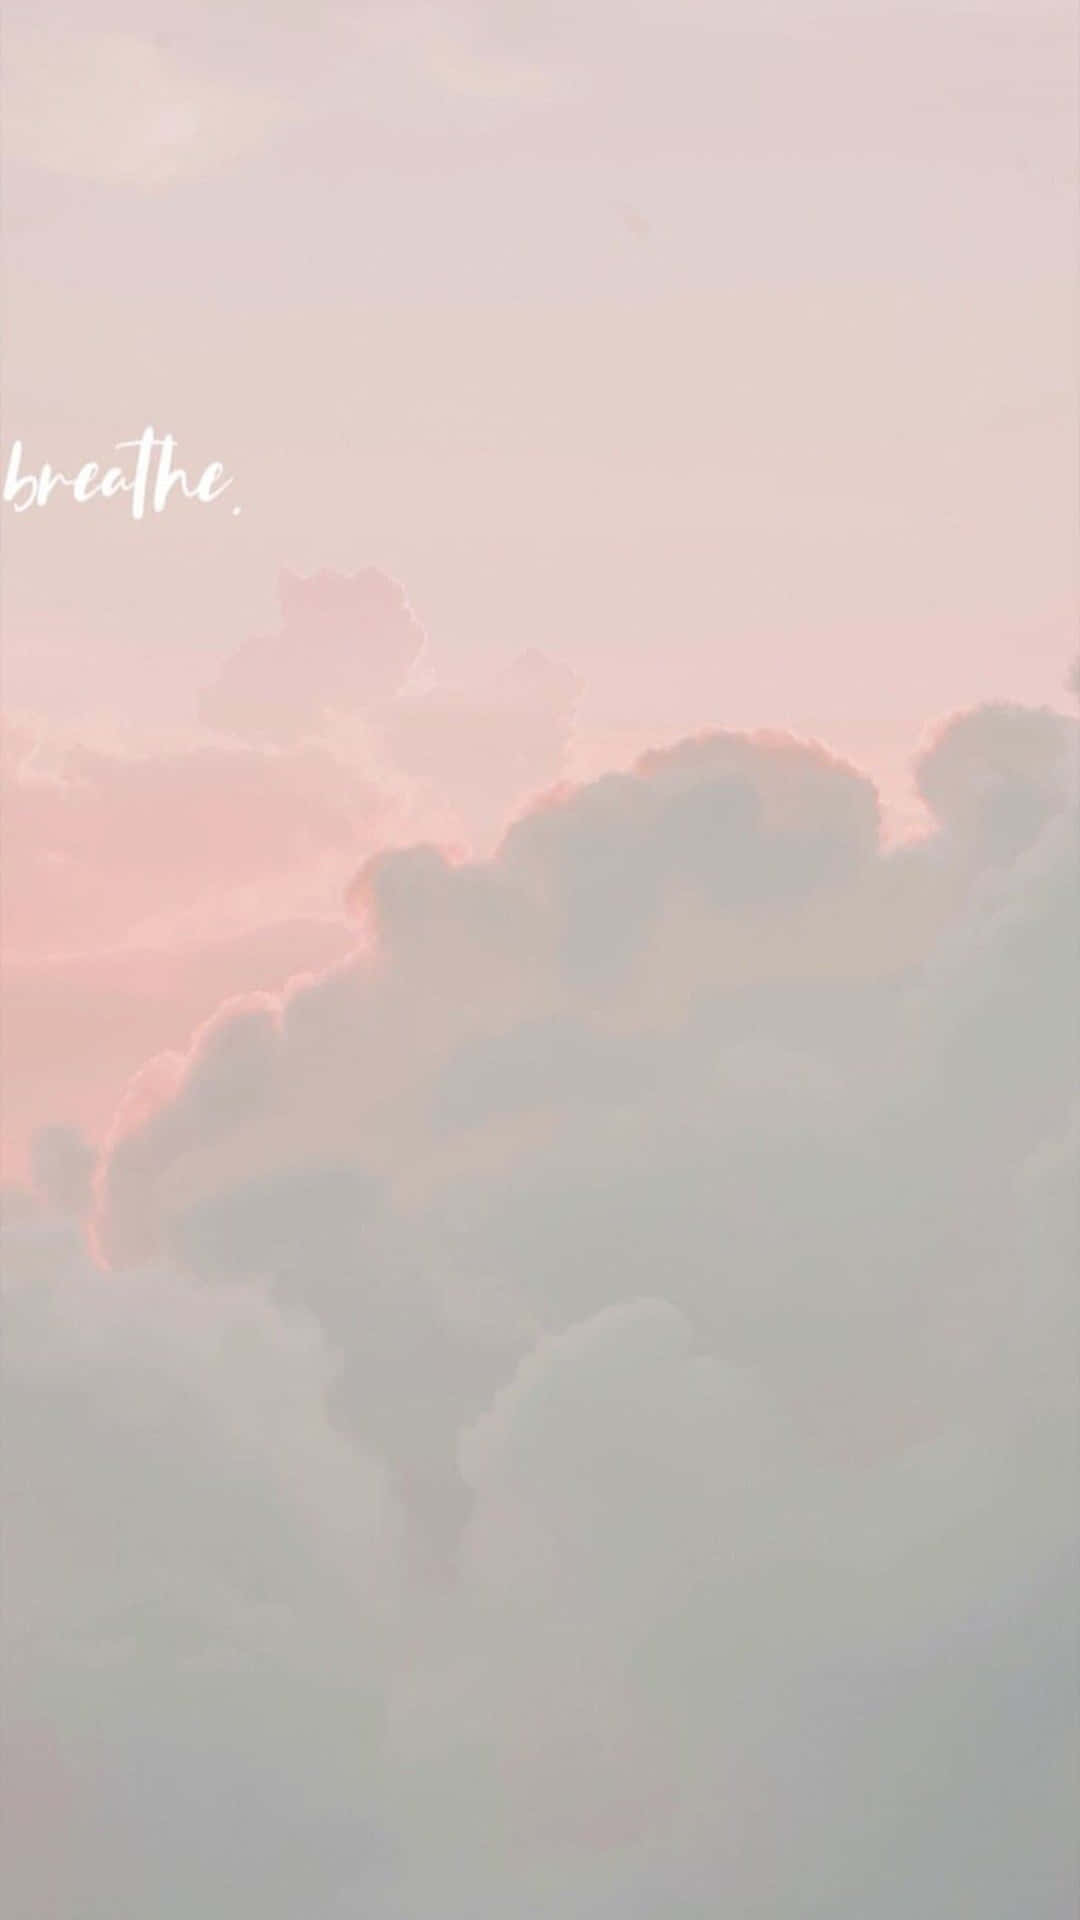 Enjoy a peaceful and dreamy sky moment with angel aesthetic clouds Wallpaper